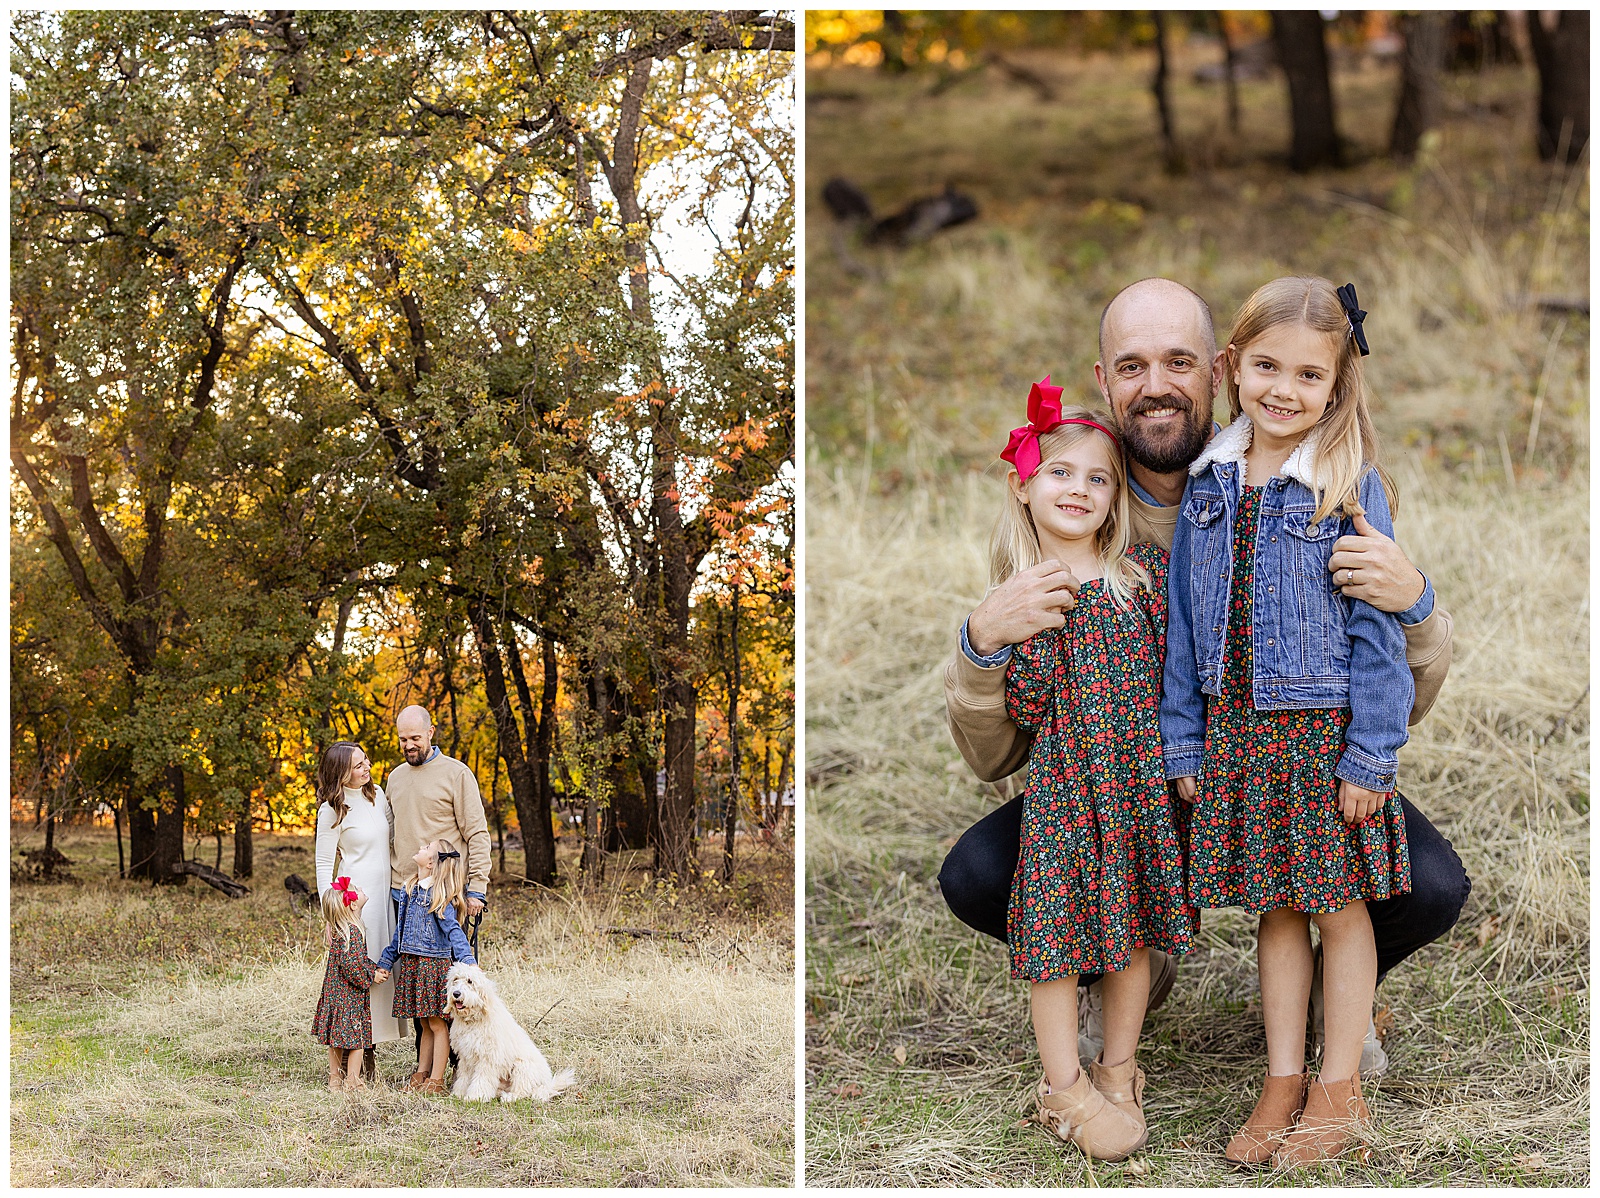 Lower Bidwell Park Family Session Chico CA October Fall Dog Goldendoodle White Dress,